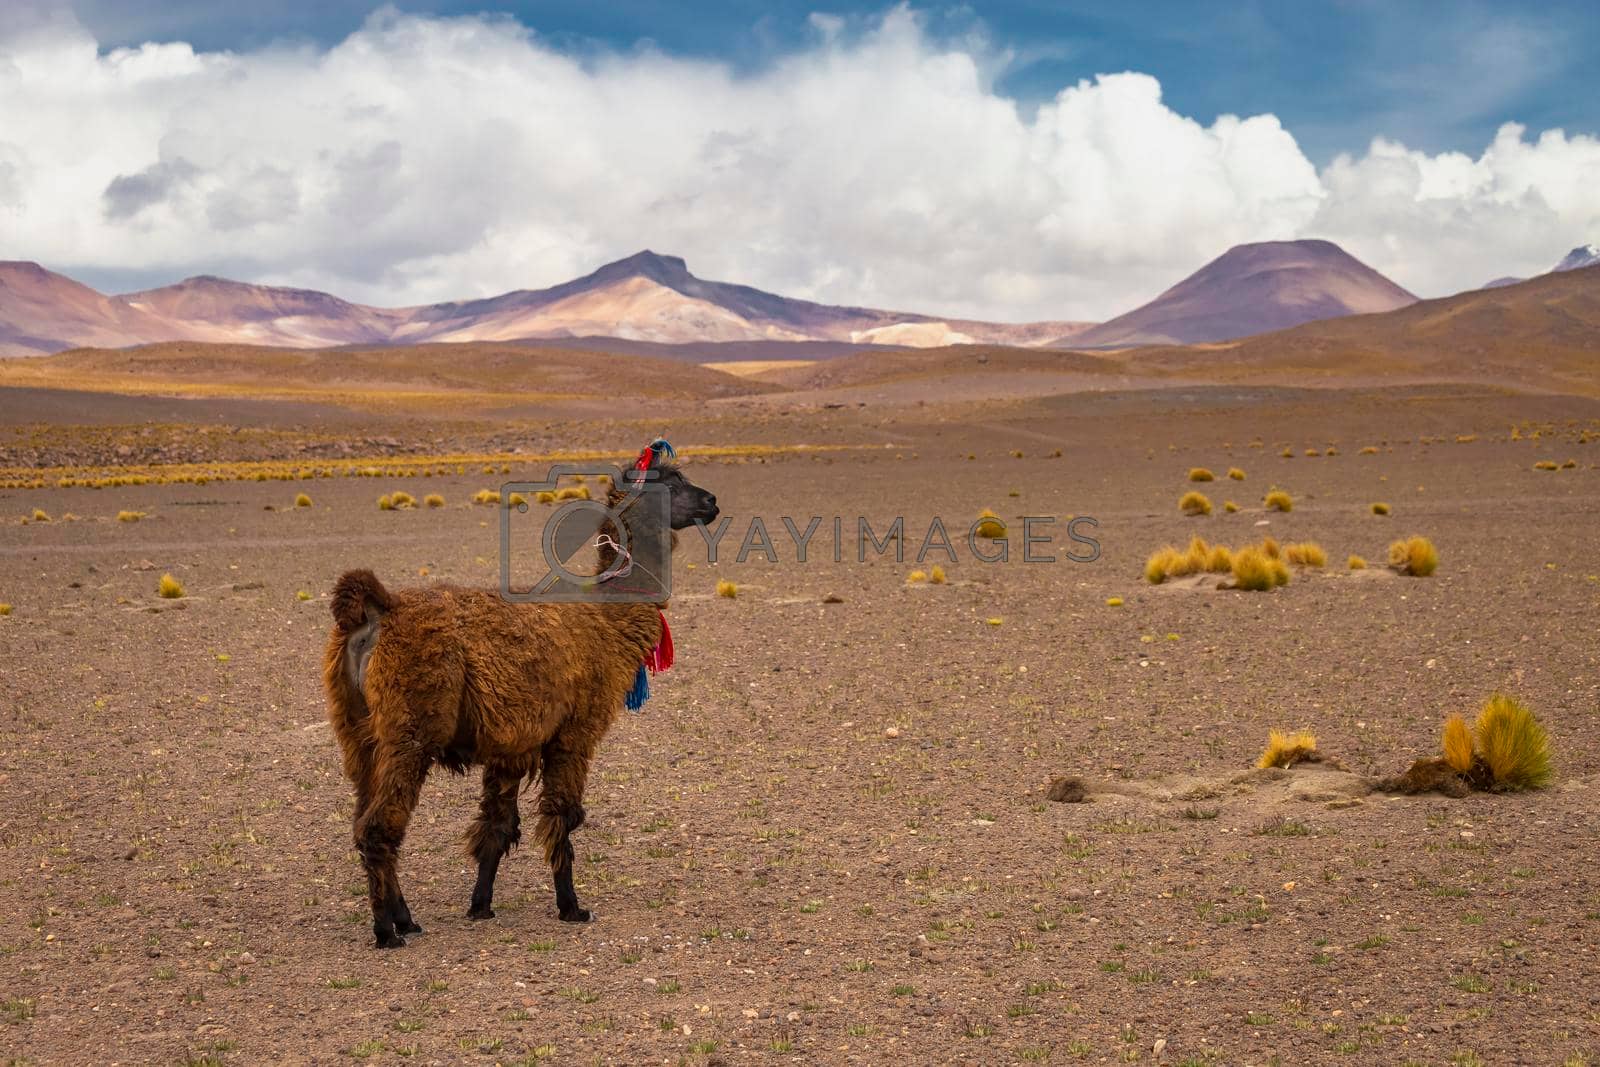 Royalty free image of Young llama in the wild of Atacama Desert, Andes altiplano, Chile by positivetravelart